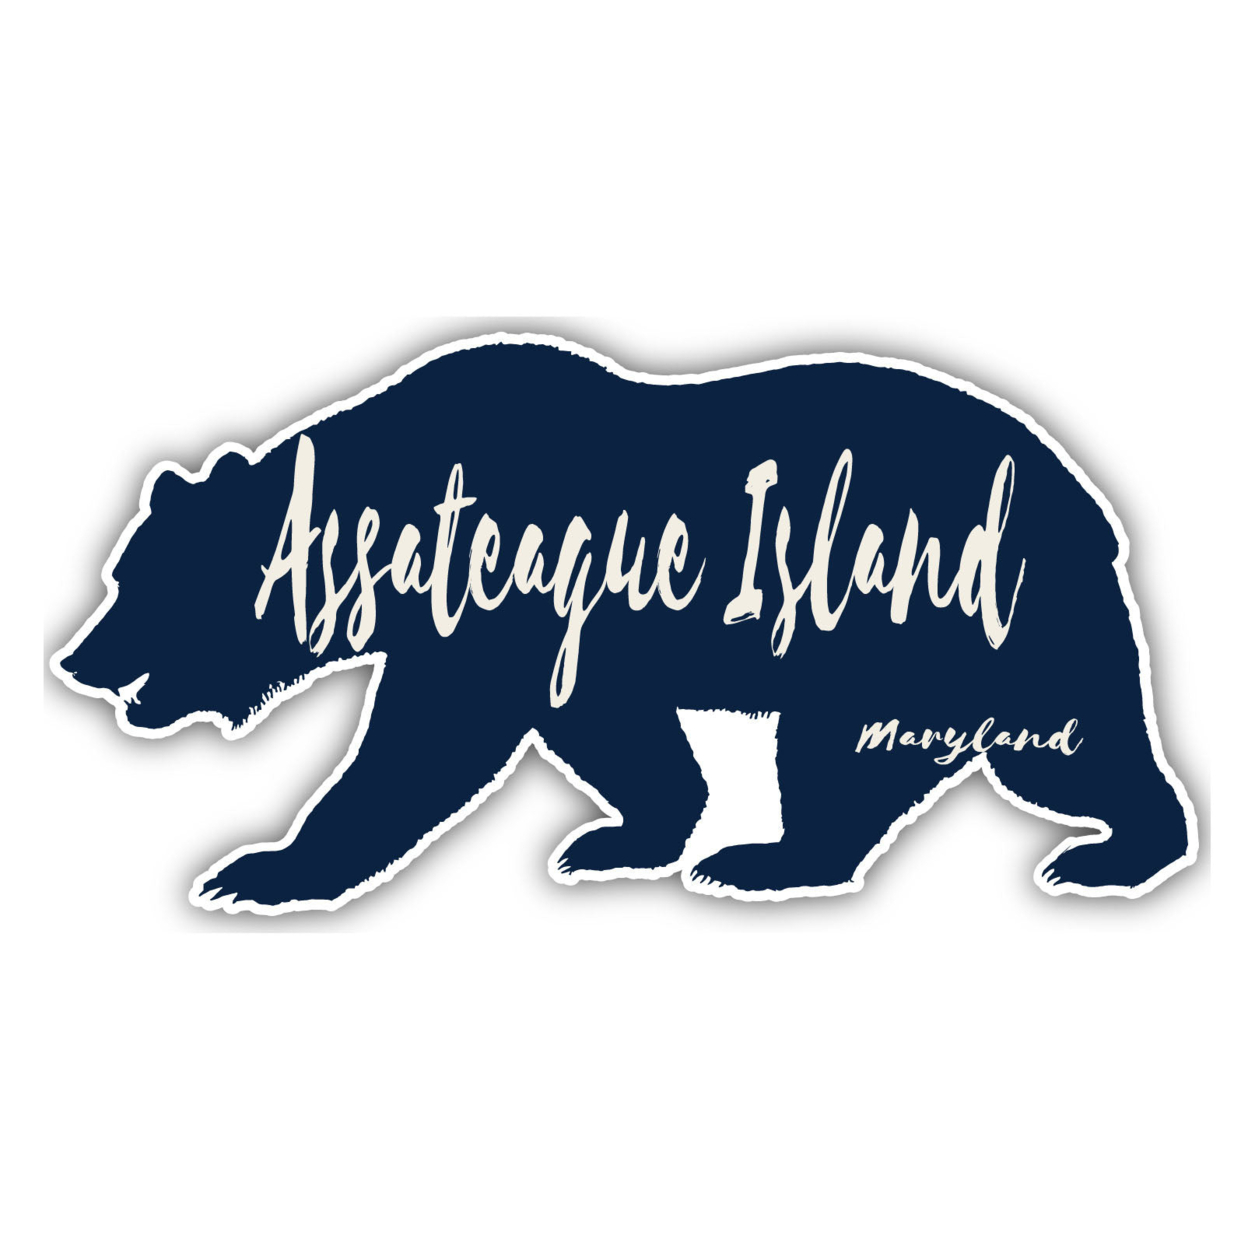 Assateague Island Maryland Souvenir Decorative Stickers (Choose Theme And Size) - 4-Pack, 4-Inch, Bear